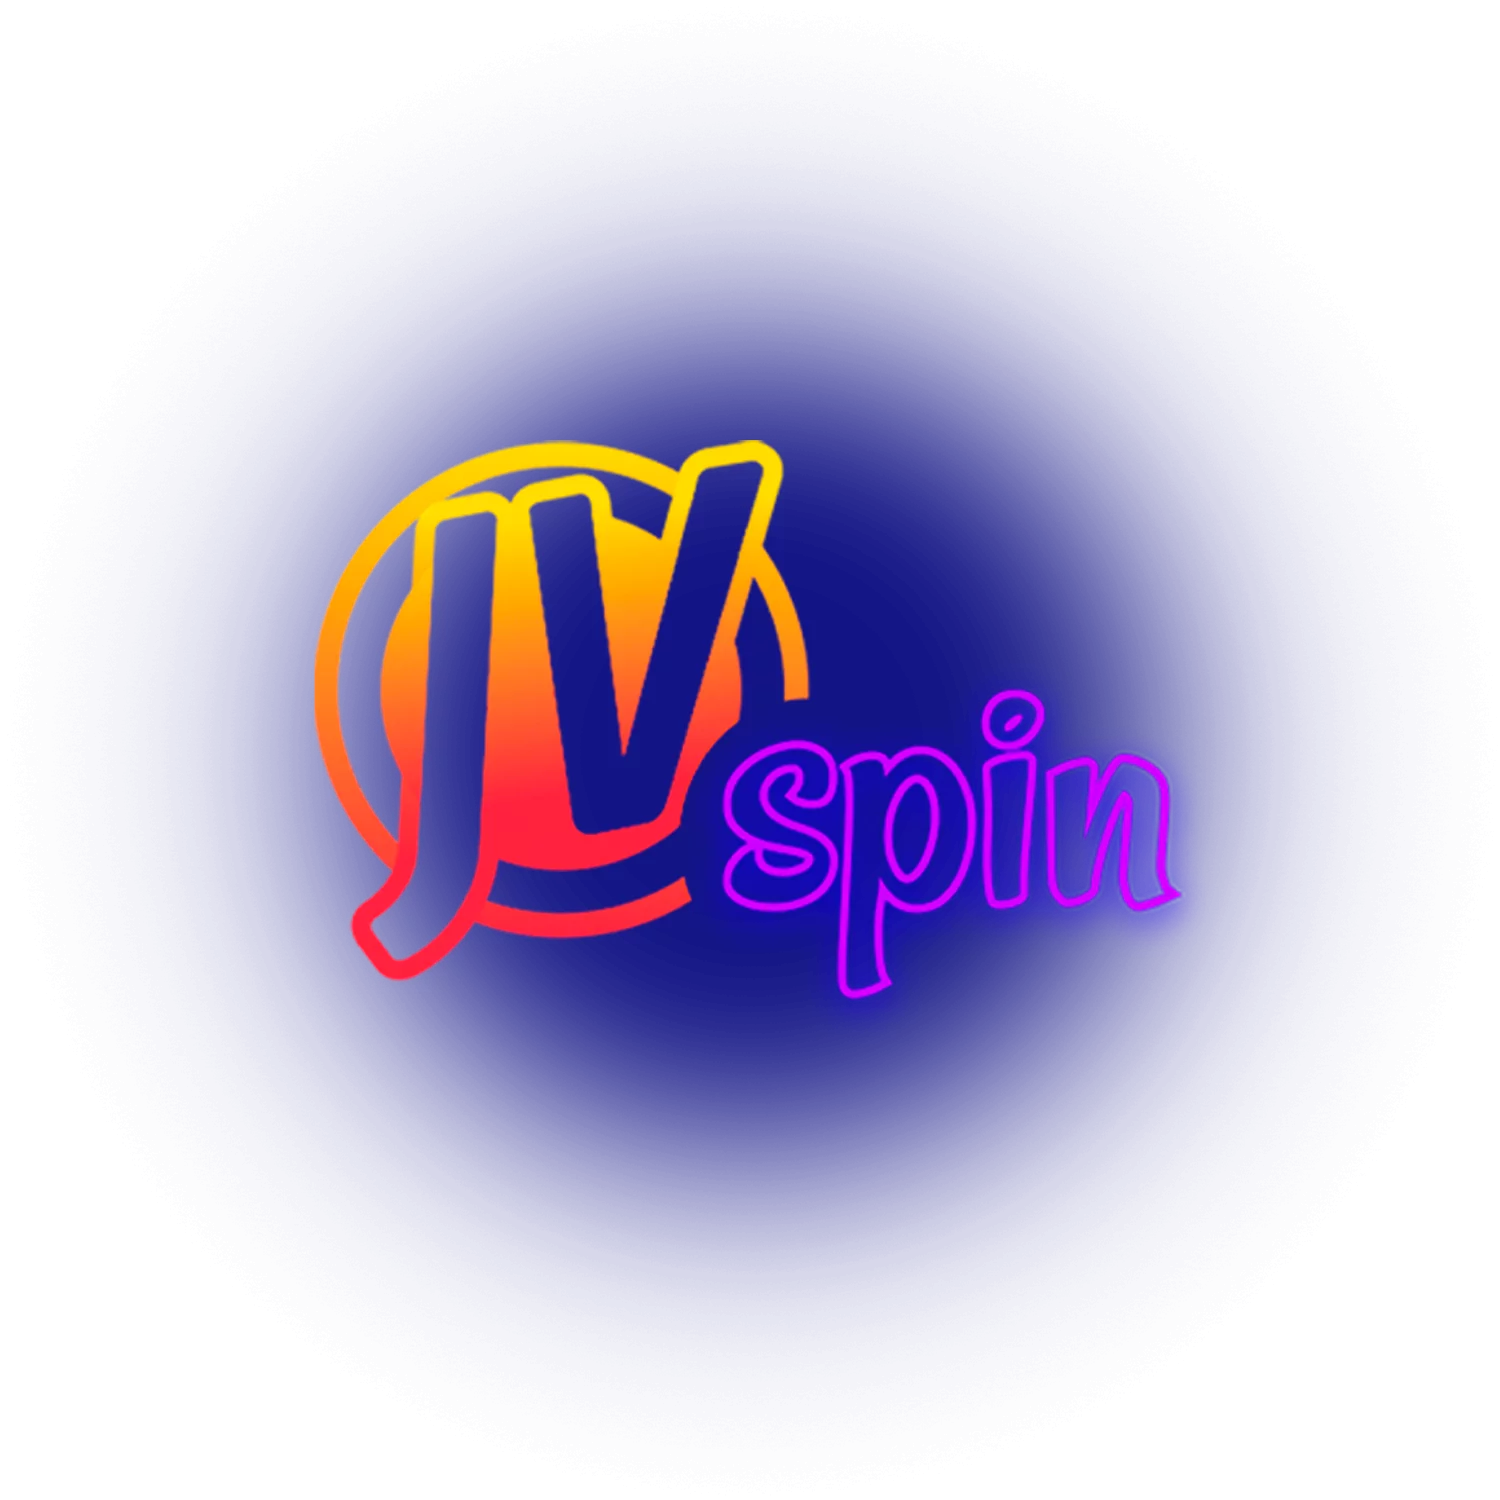 To be allowed to play games on the JVSpin site you should know and follow the rules of the site.